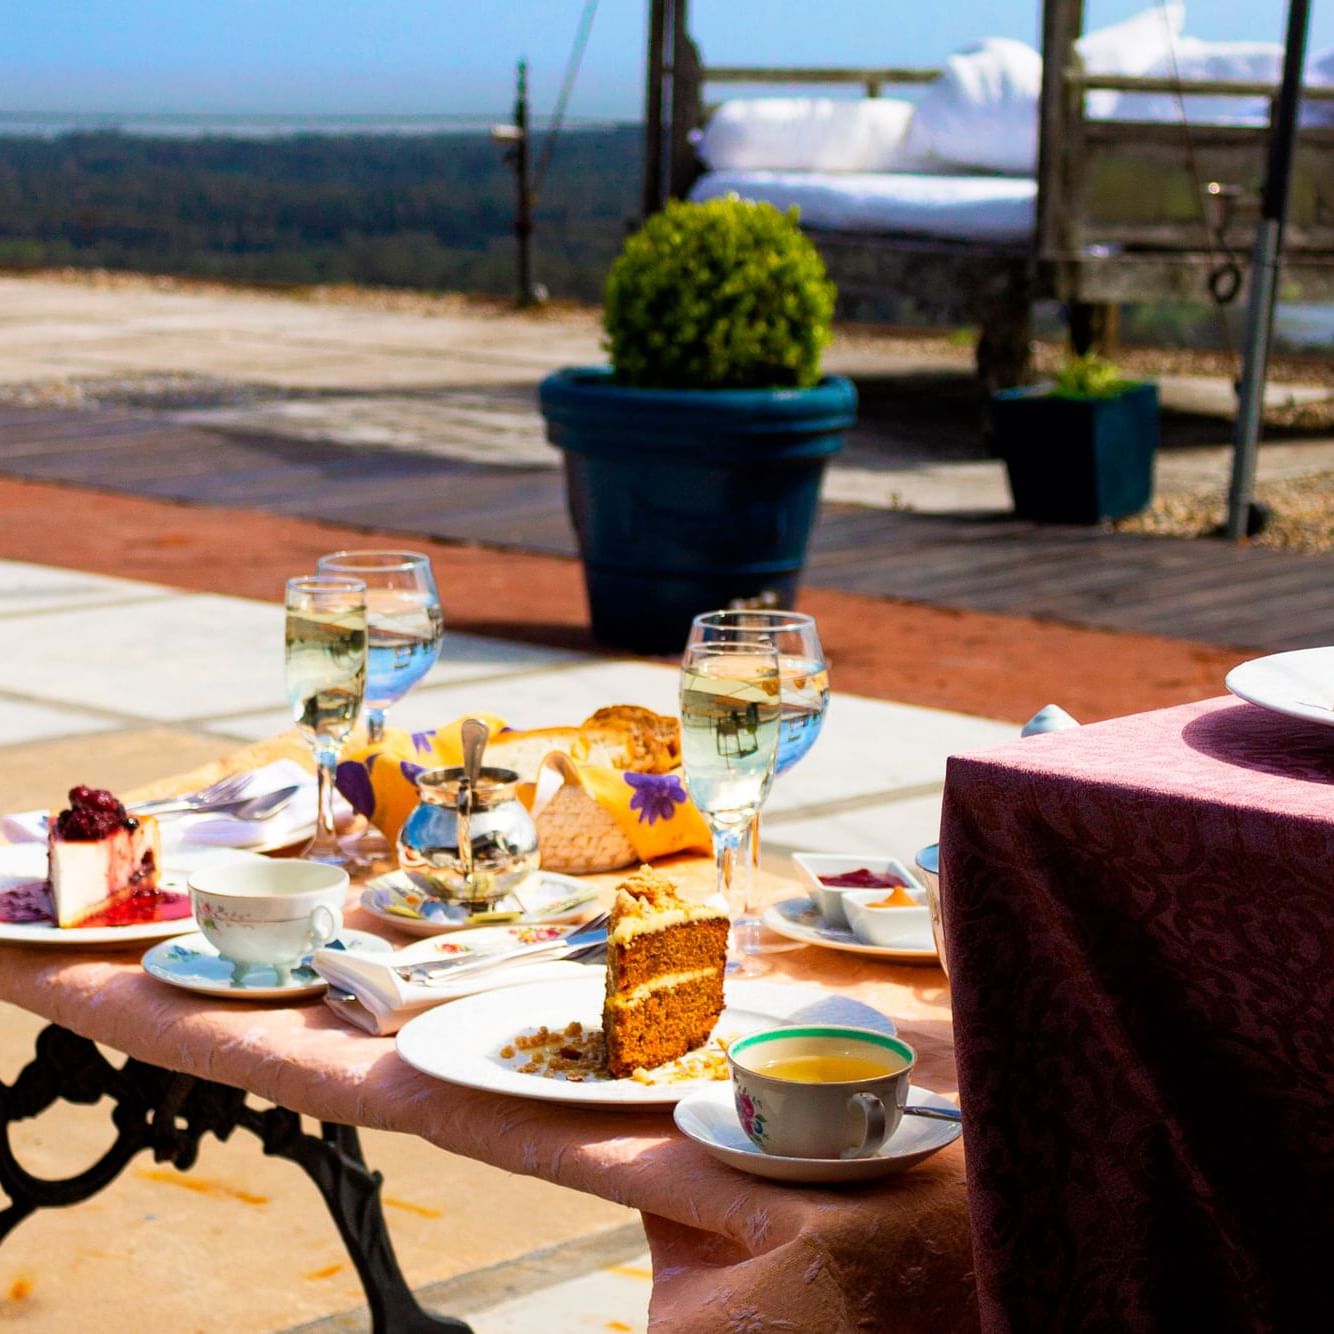 Evening tea served with cake at Las Cumbres Boutique Hotel